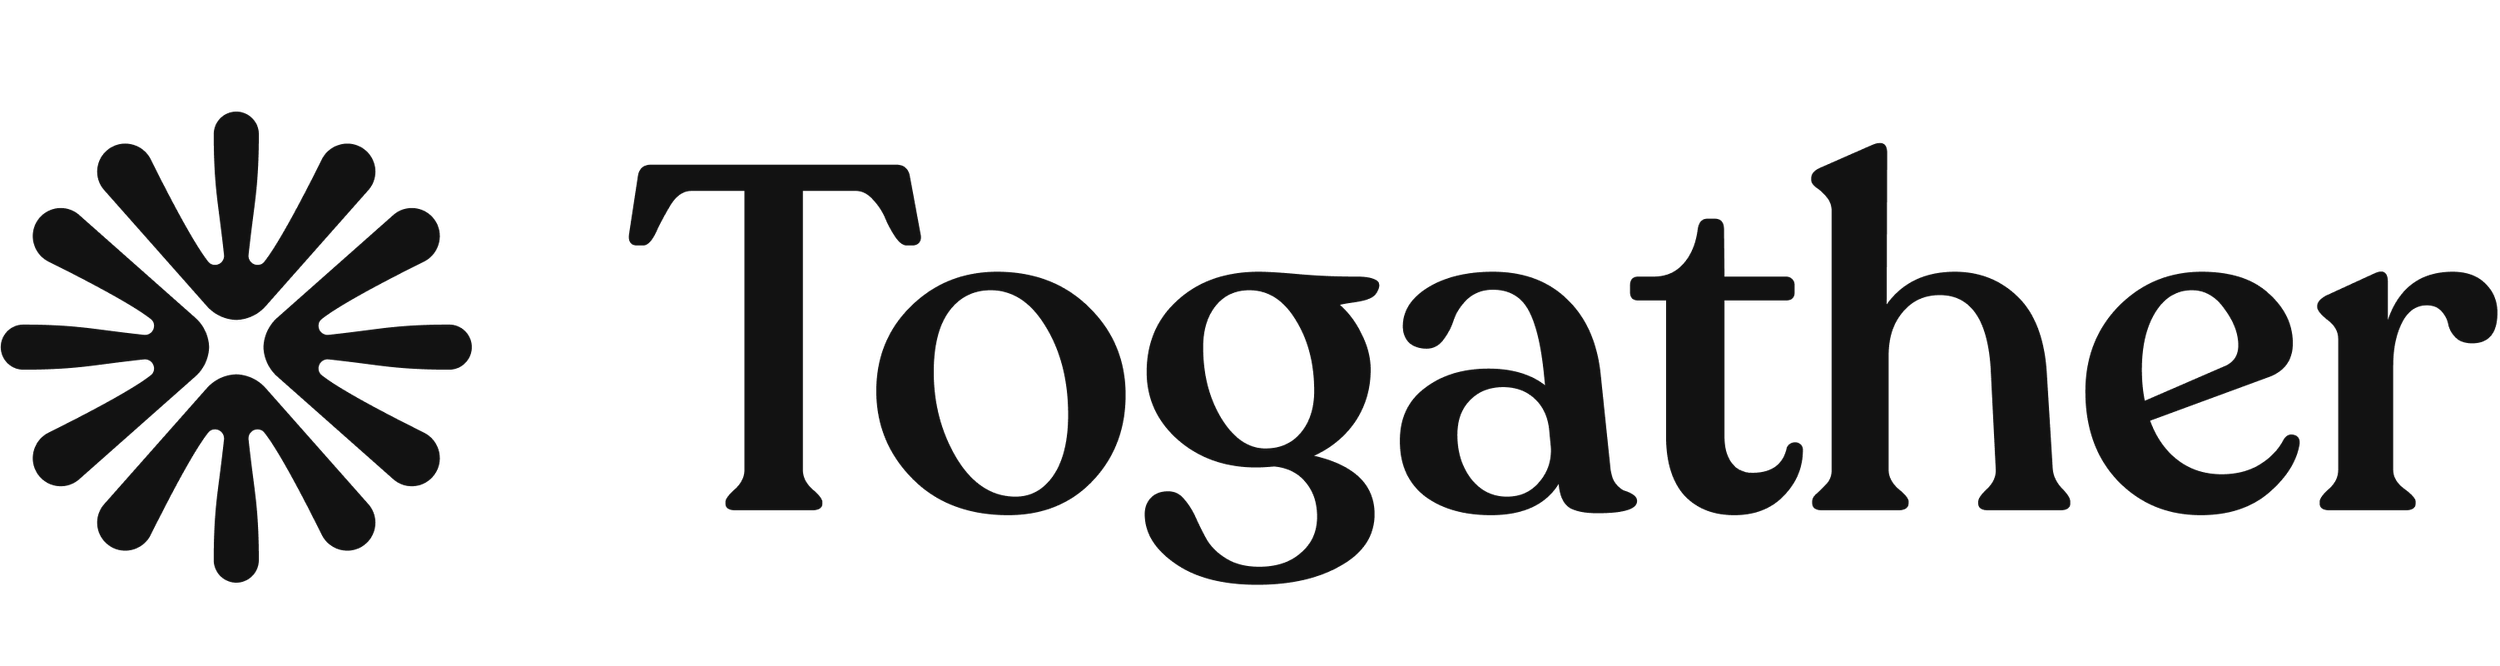 togather_logo.png